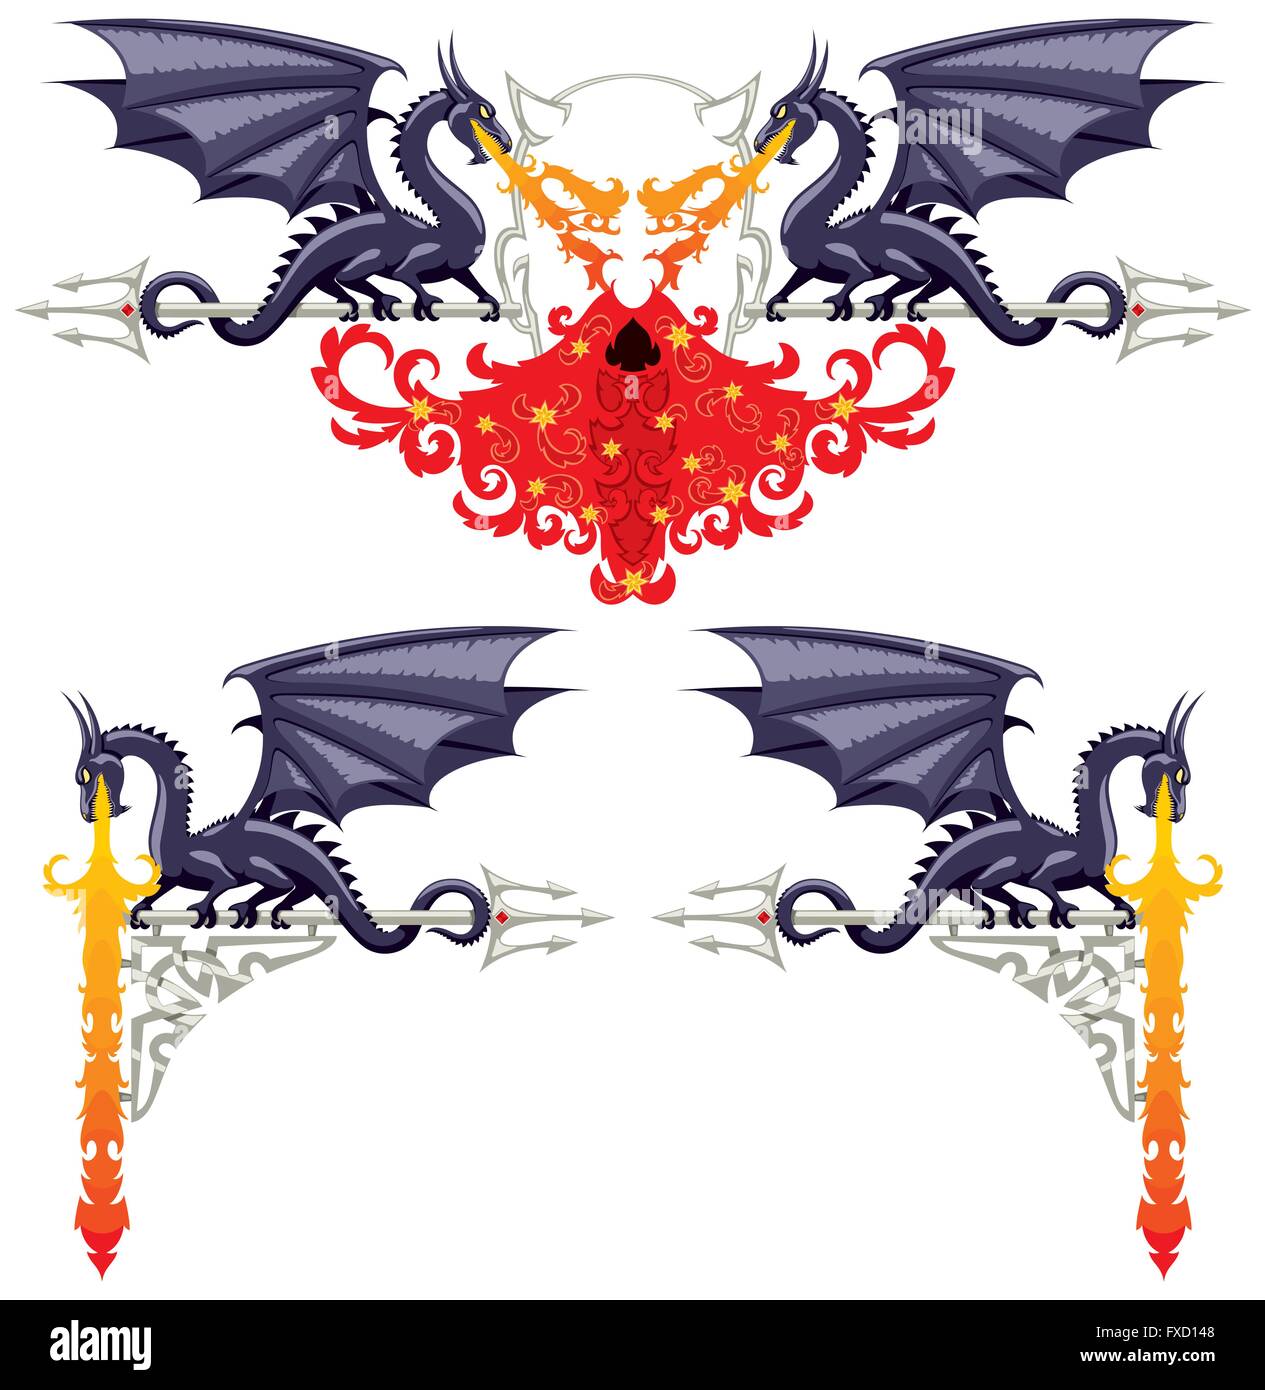 Fantasy floral ornaments with dragons, flames and a devil. Stock Vector